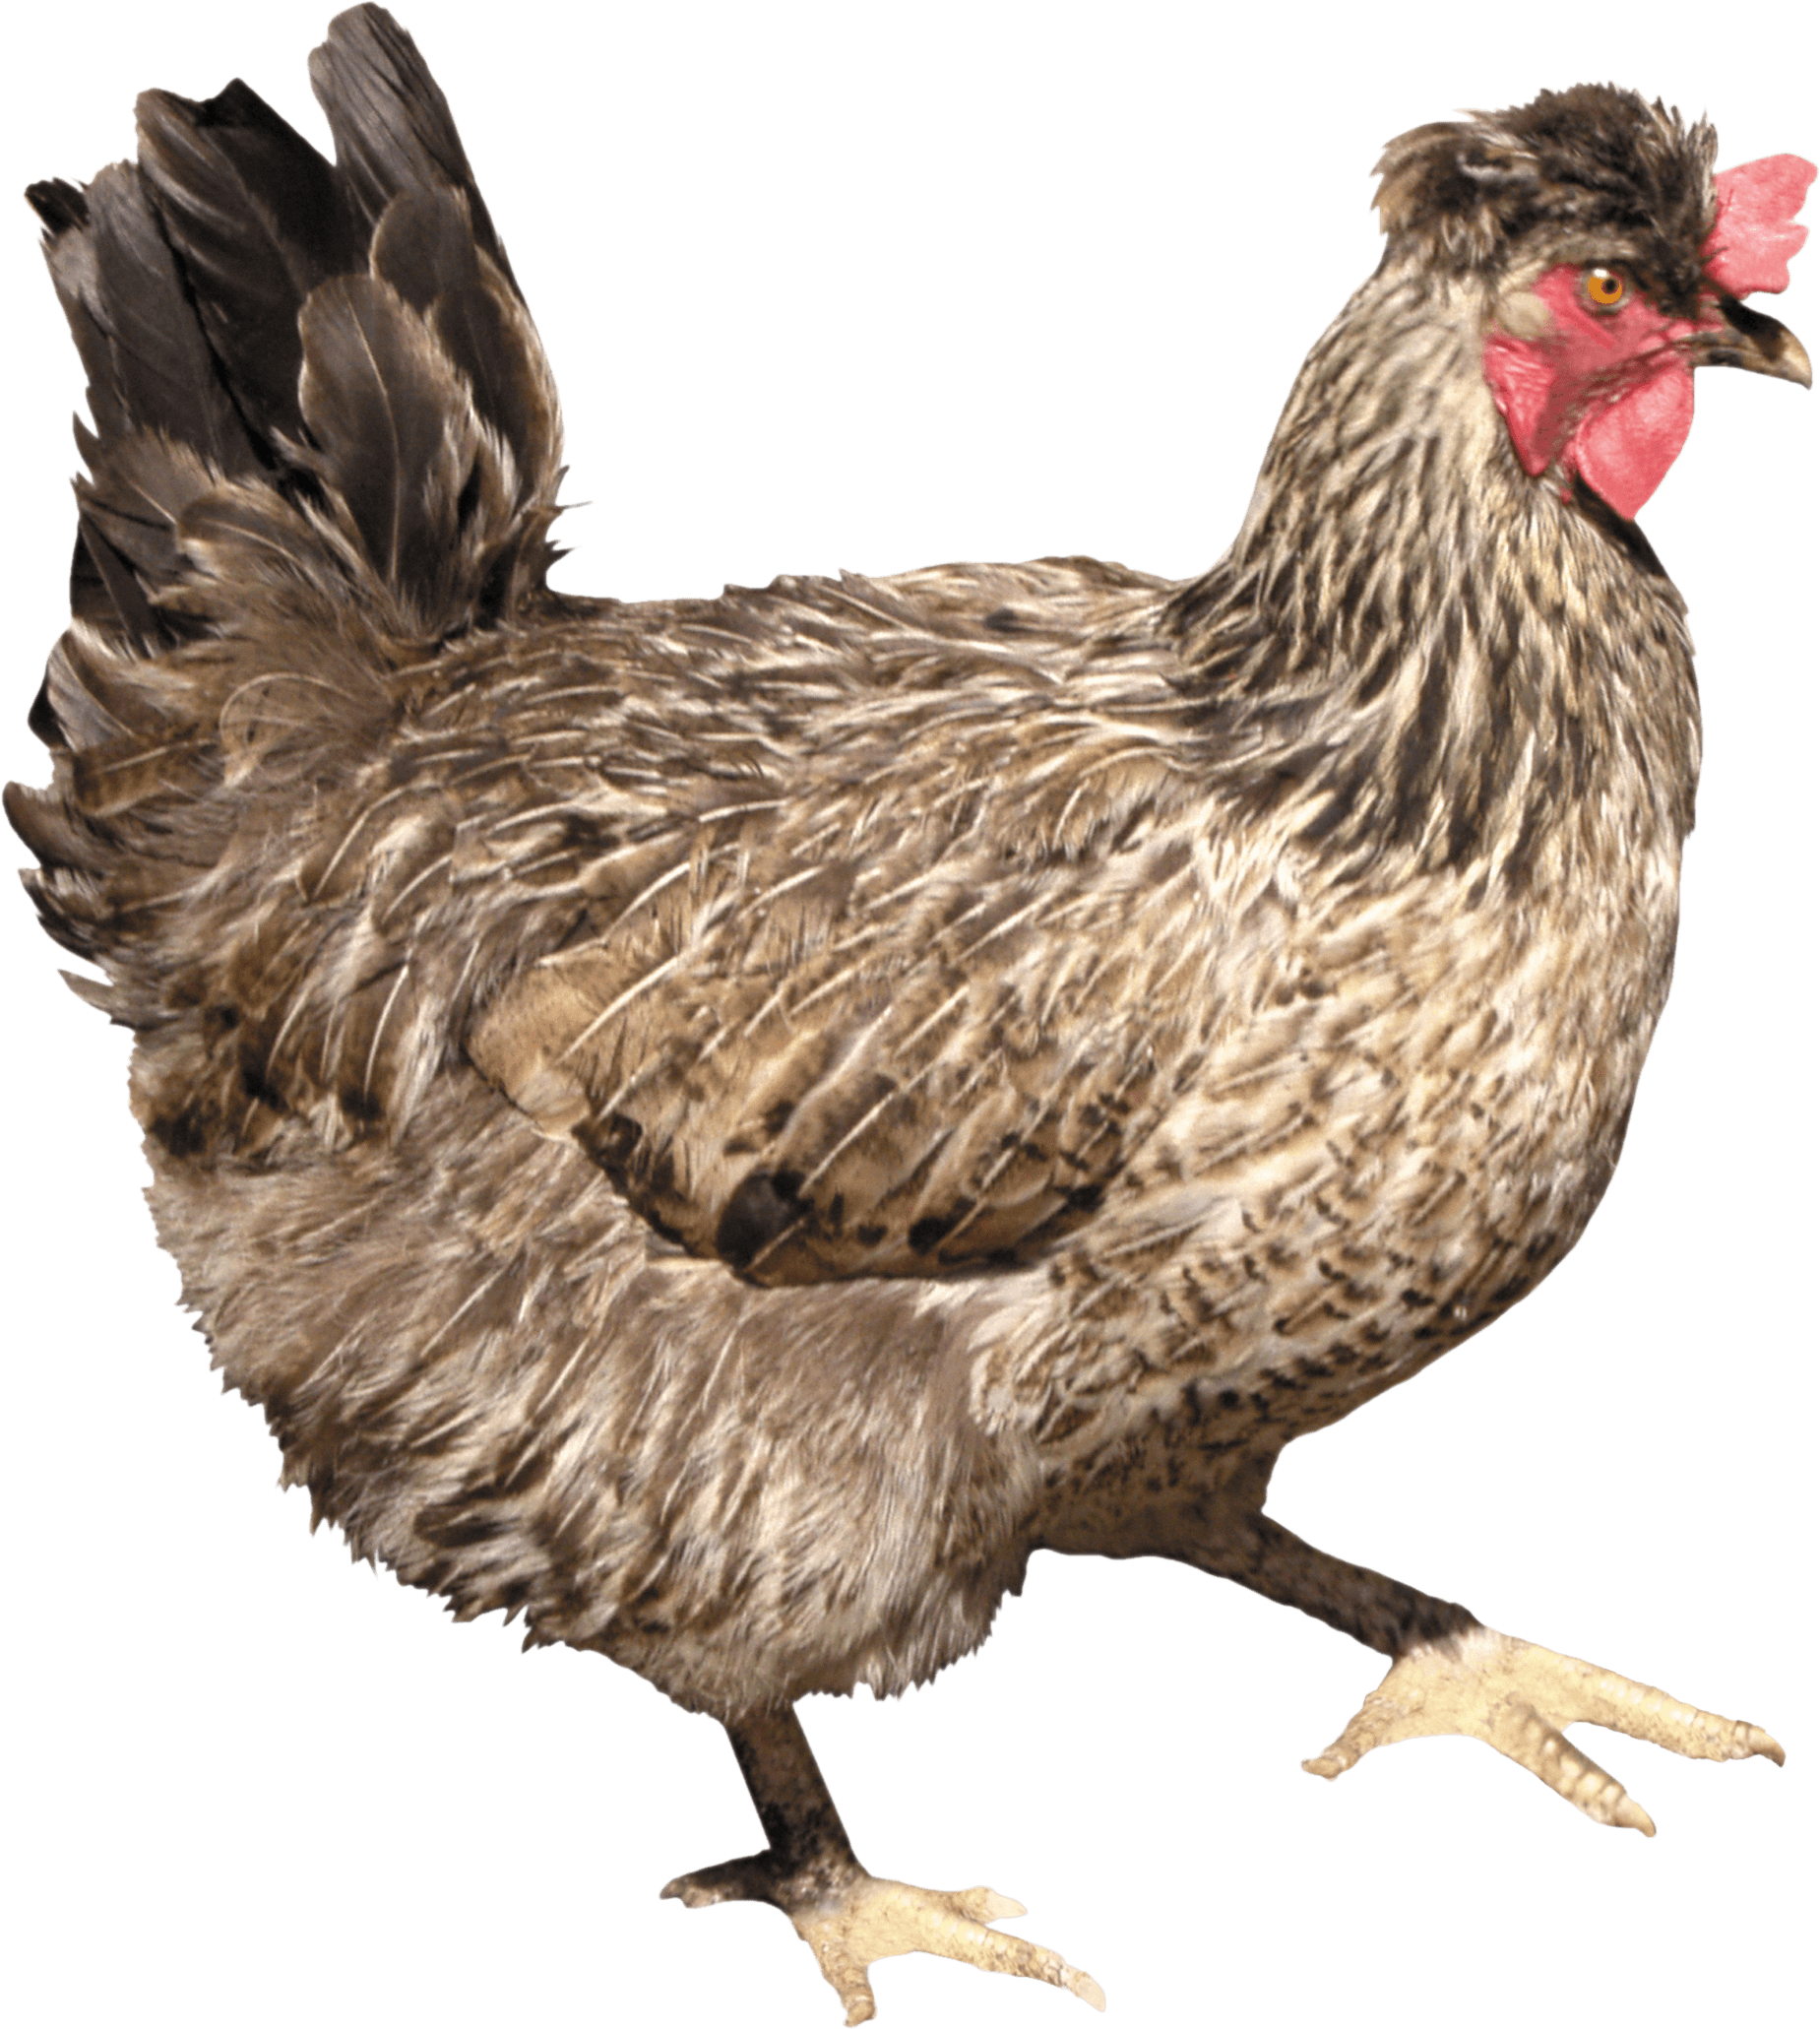 White Chicken Png image #4028